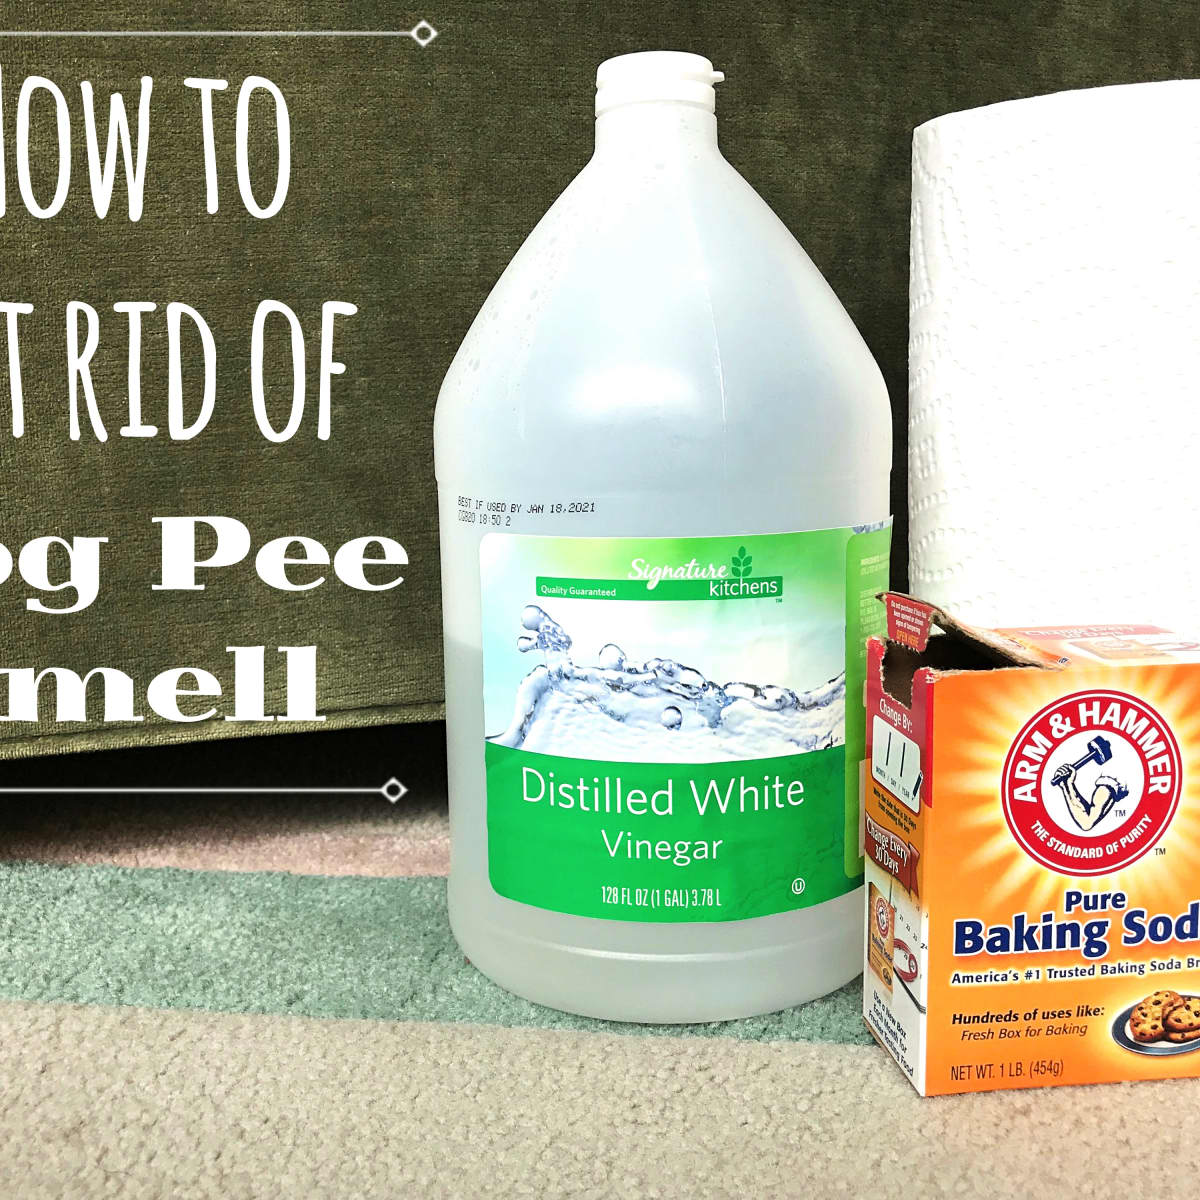 Odor Of Dog Urine From Carpets, Can You Get The Smell Of Dog Urine Out Hardwood Floors